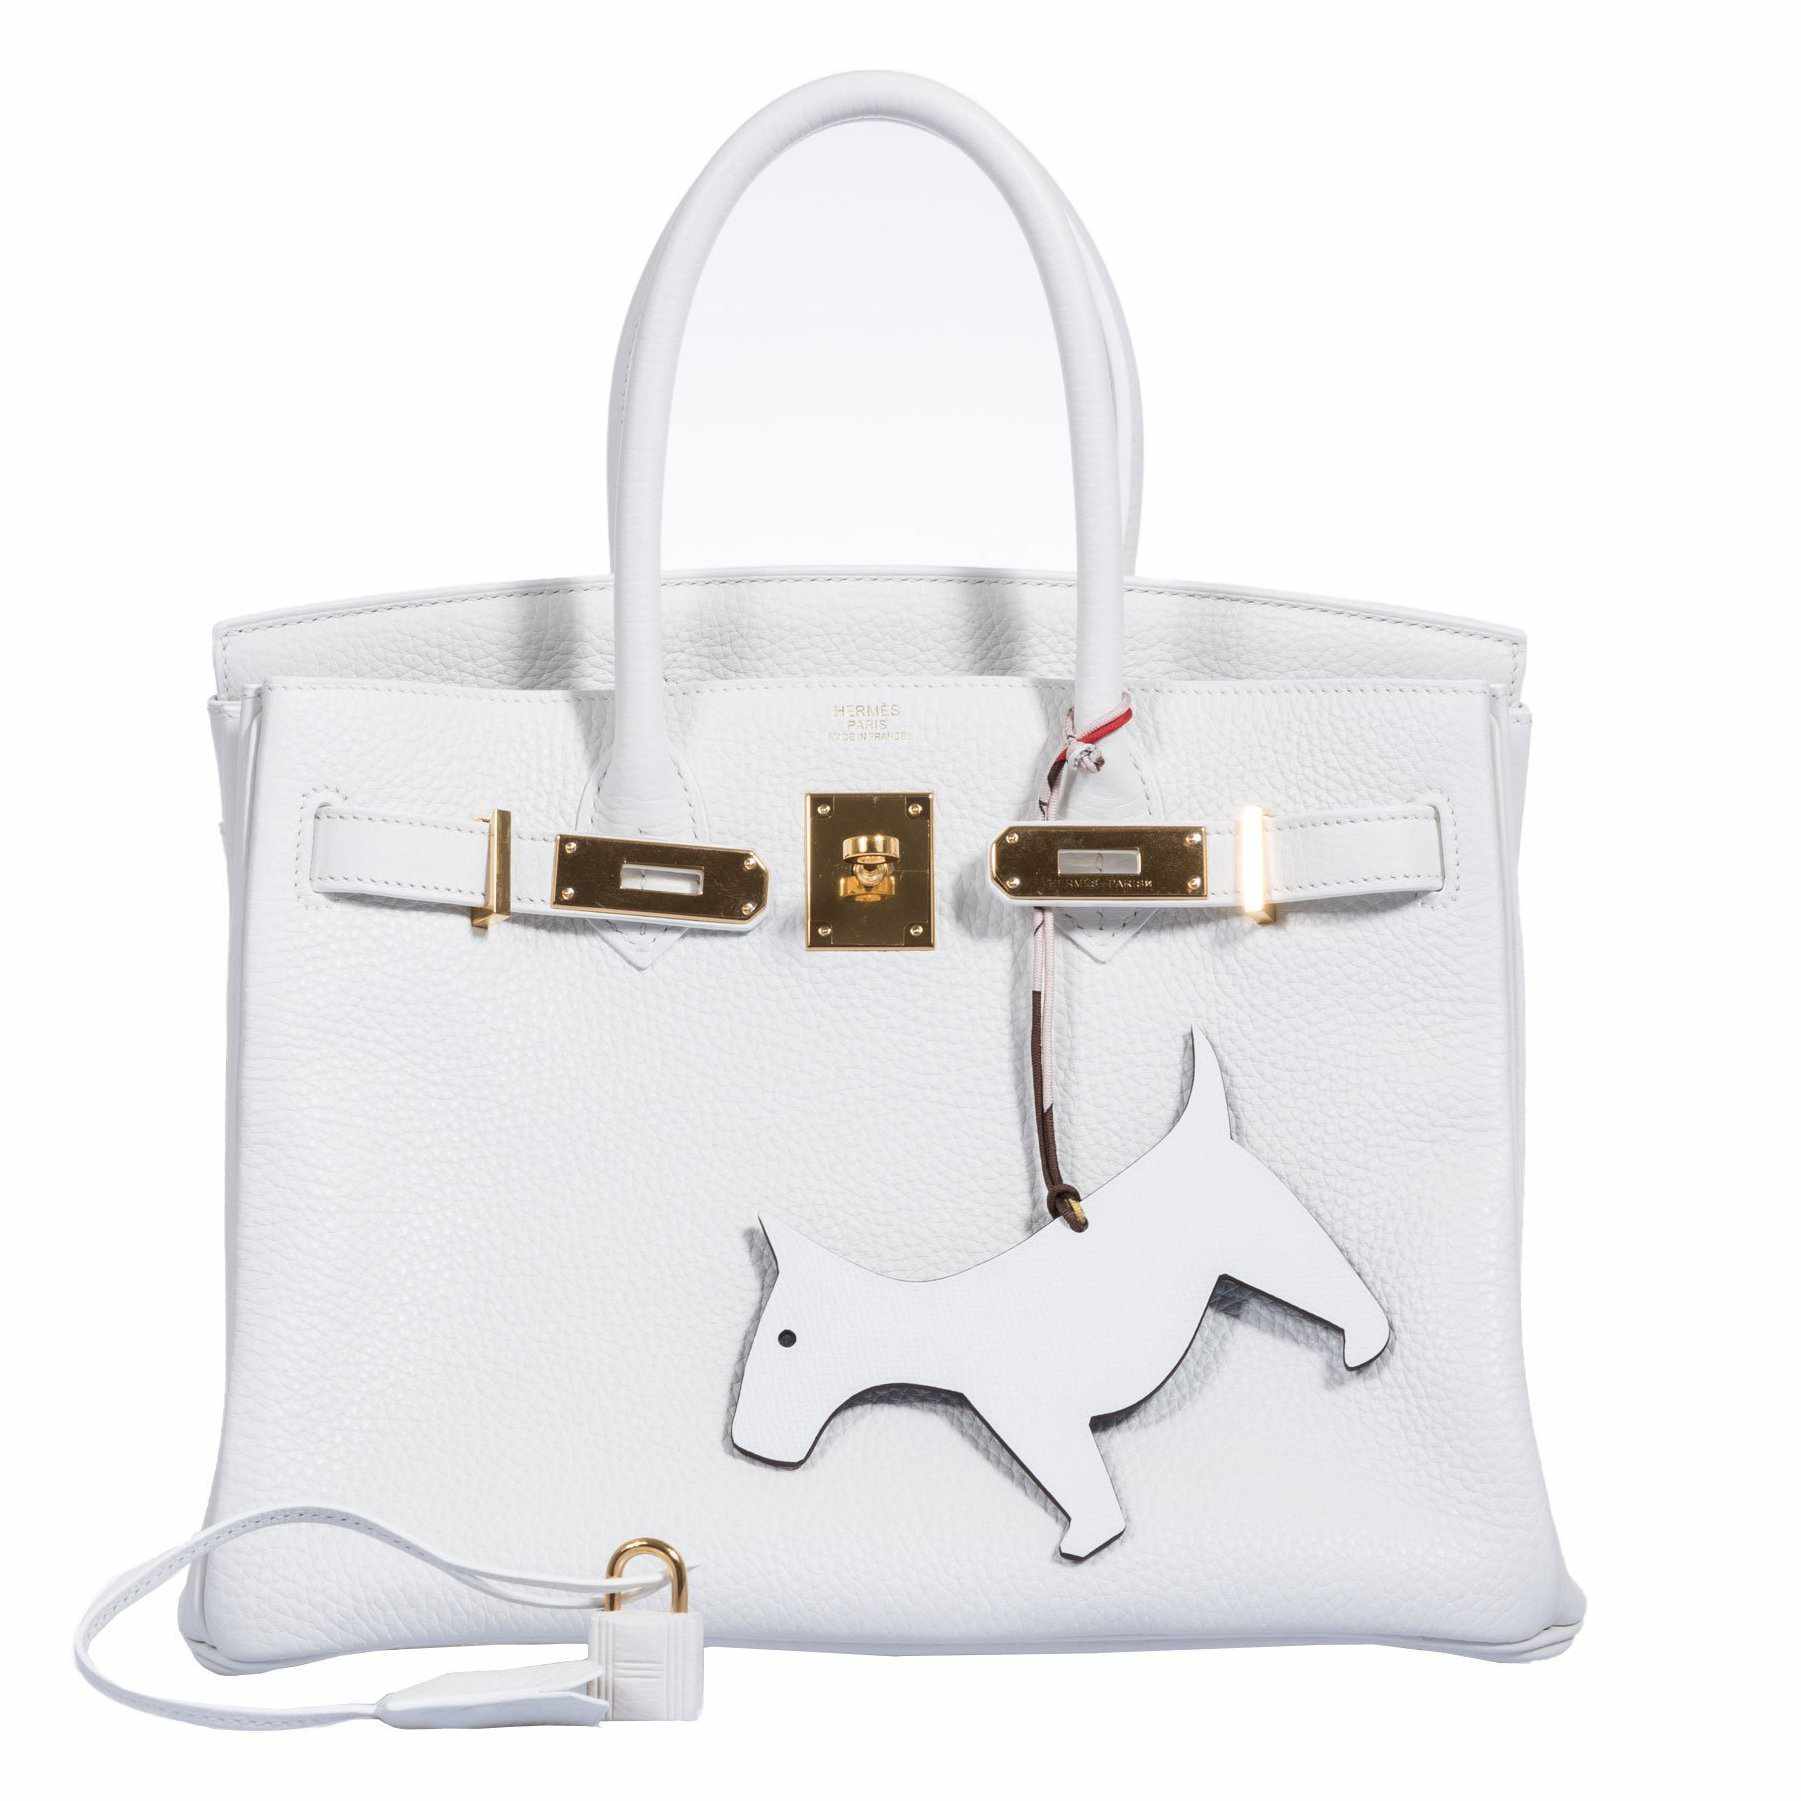 Hermes Birkin 30cm White Clemence with Gold